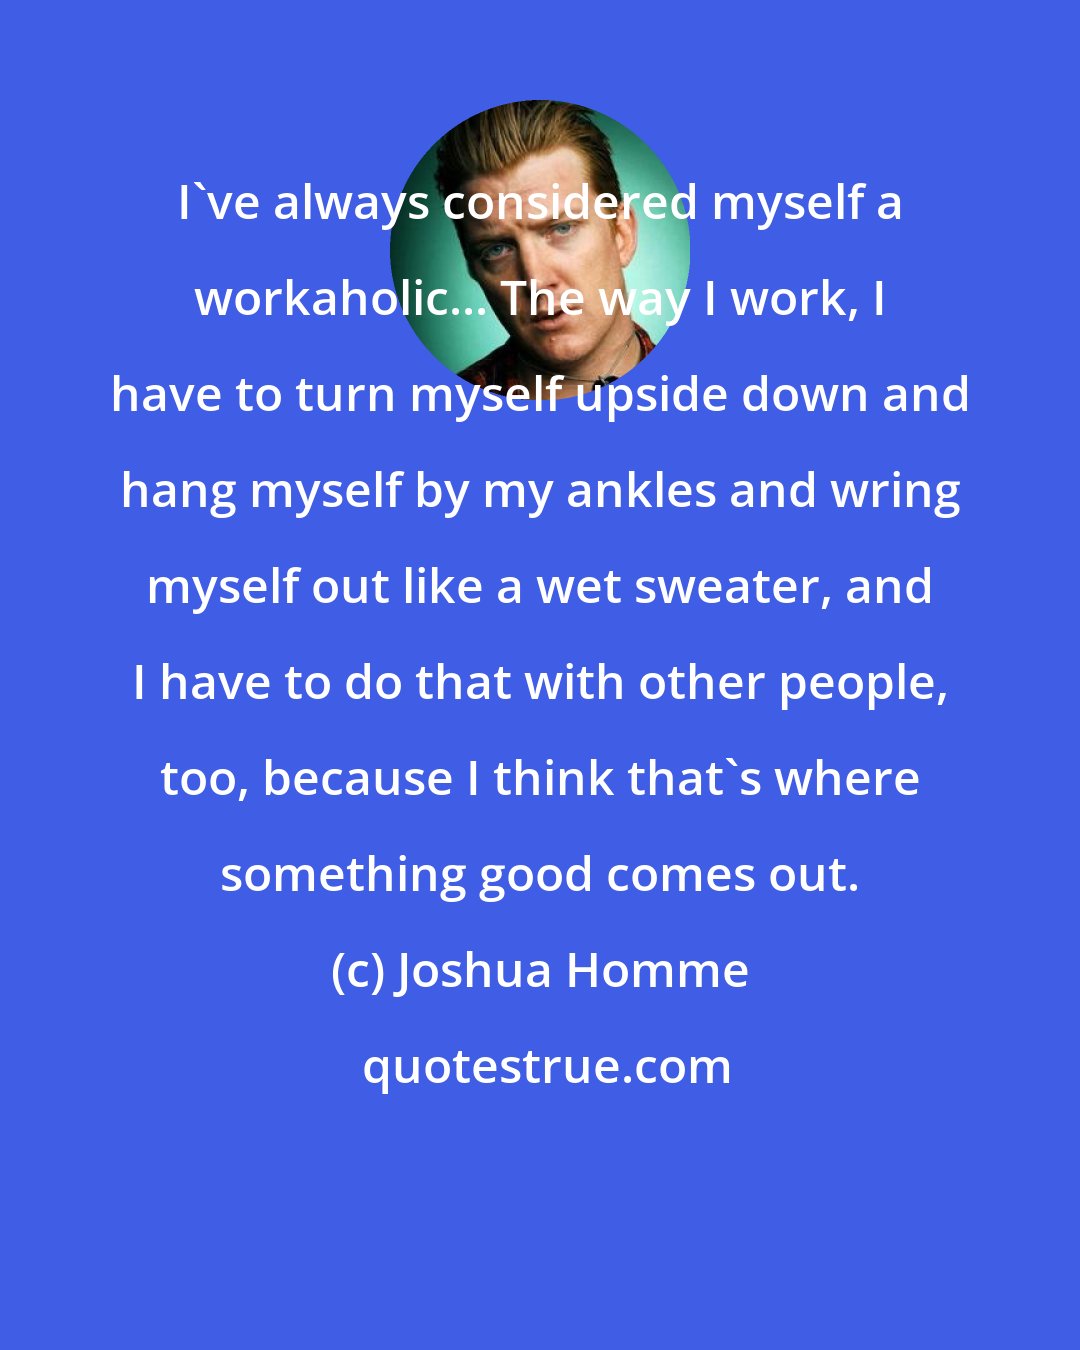 Joshua Homme: I've always considered myself a workaholic... The way I work, I have to turn myself upside down and hang myself by my ankles and wring myself out like a wet sweater, and I have to do that with other people, too, because I think that's where something good comes out.